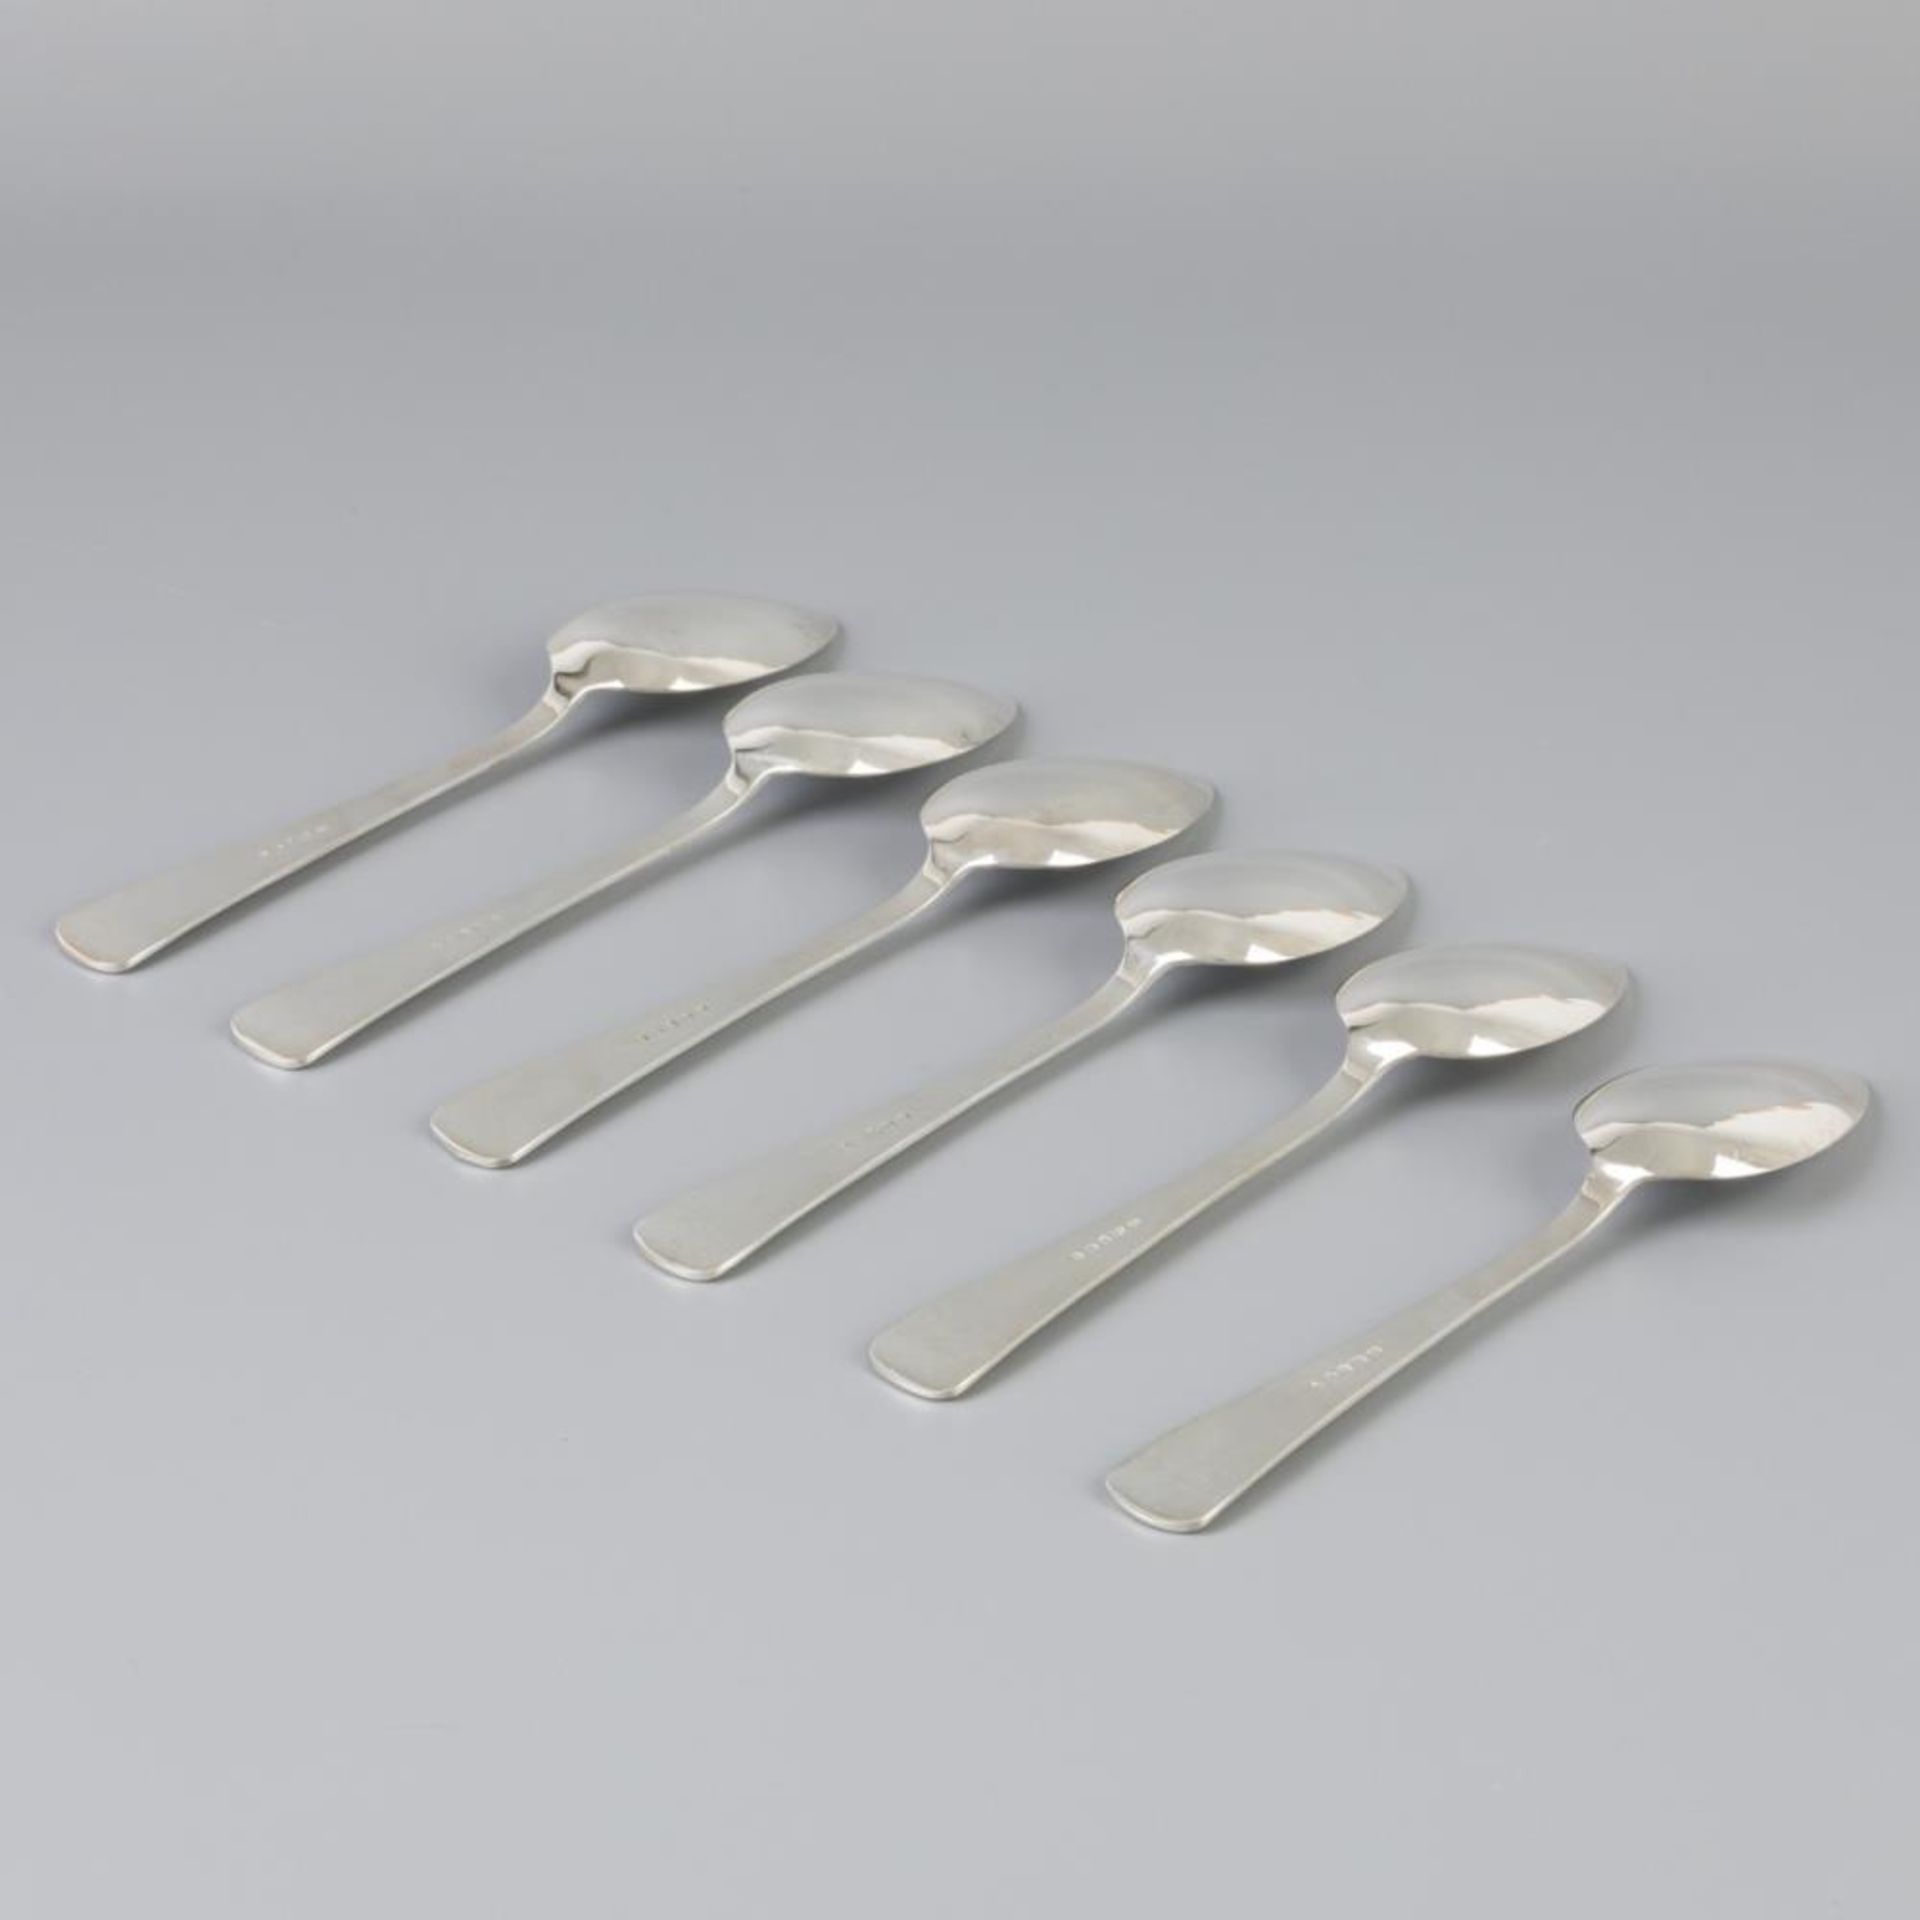 6 piece set of spoons "Haags Lofje" silver. - Image 3 of 5